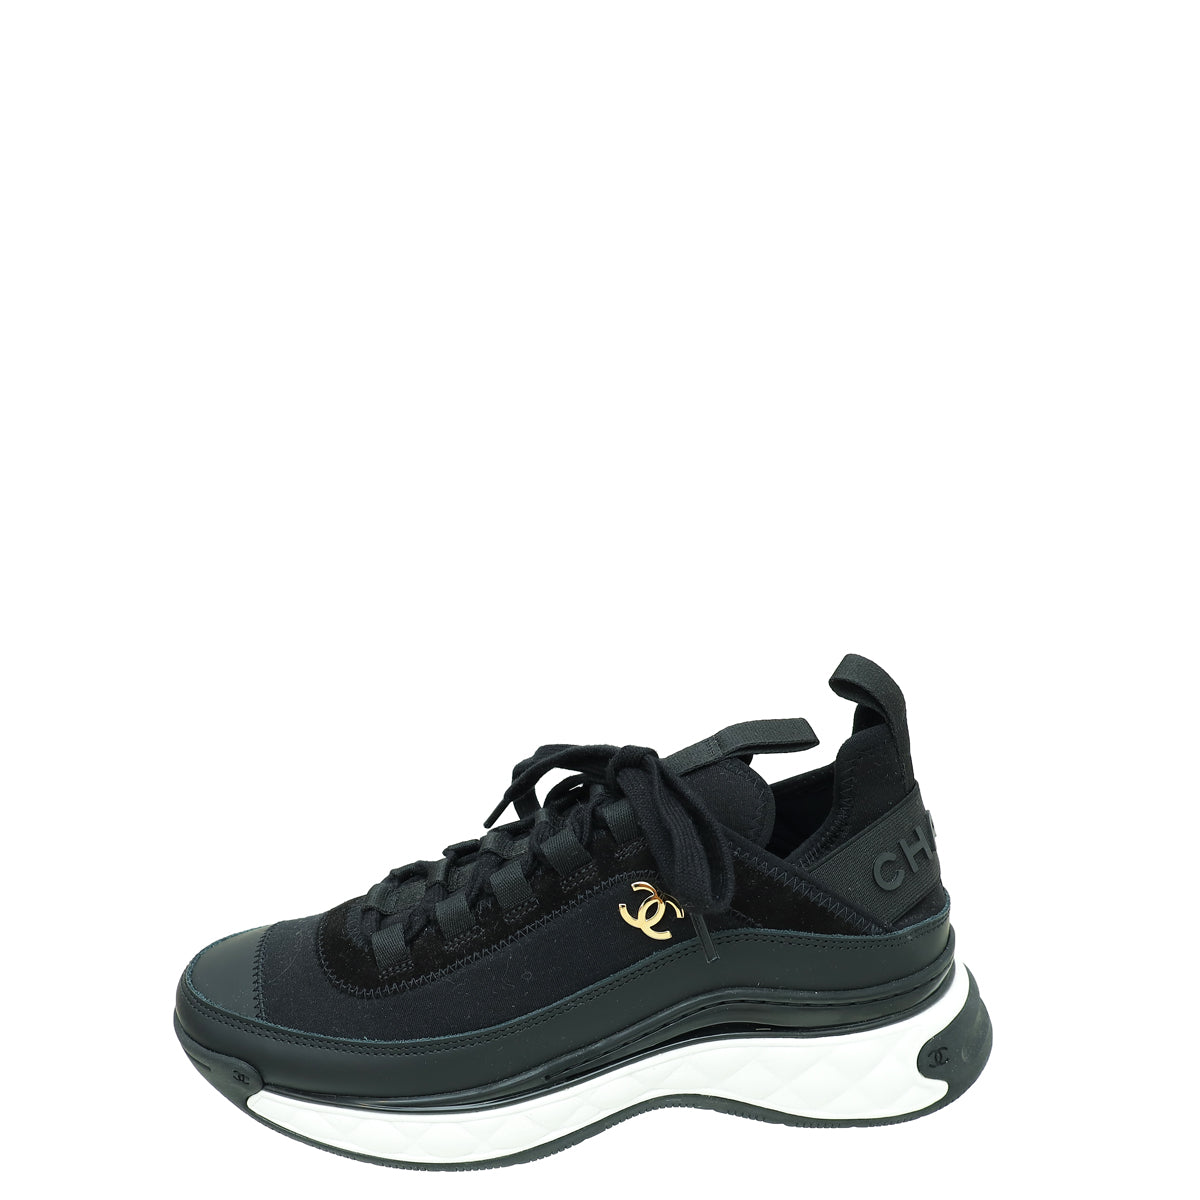 Chanel Black CC Lace Up Sneakers 36.5